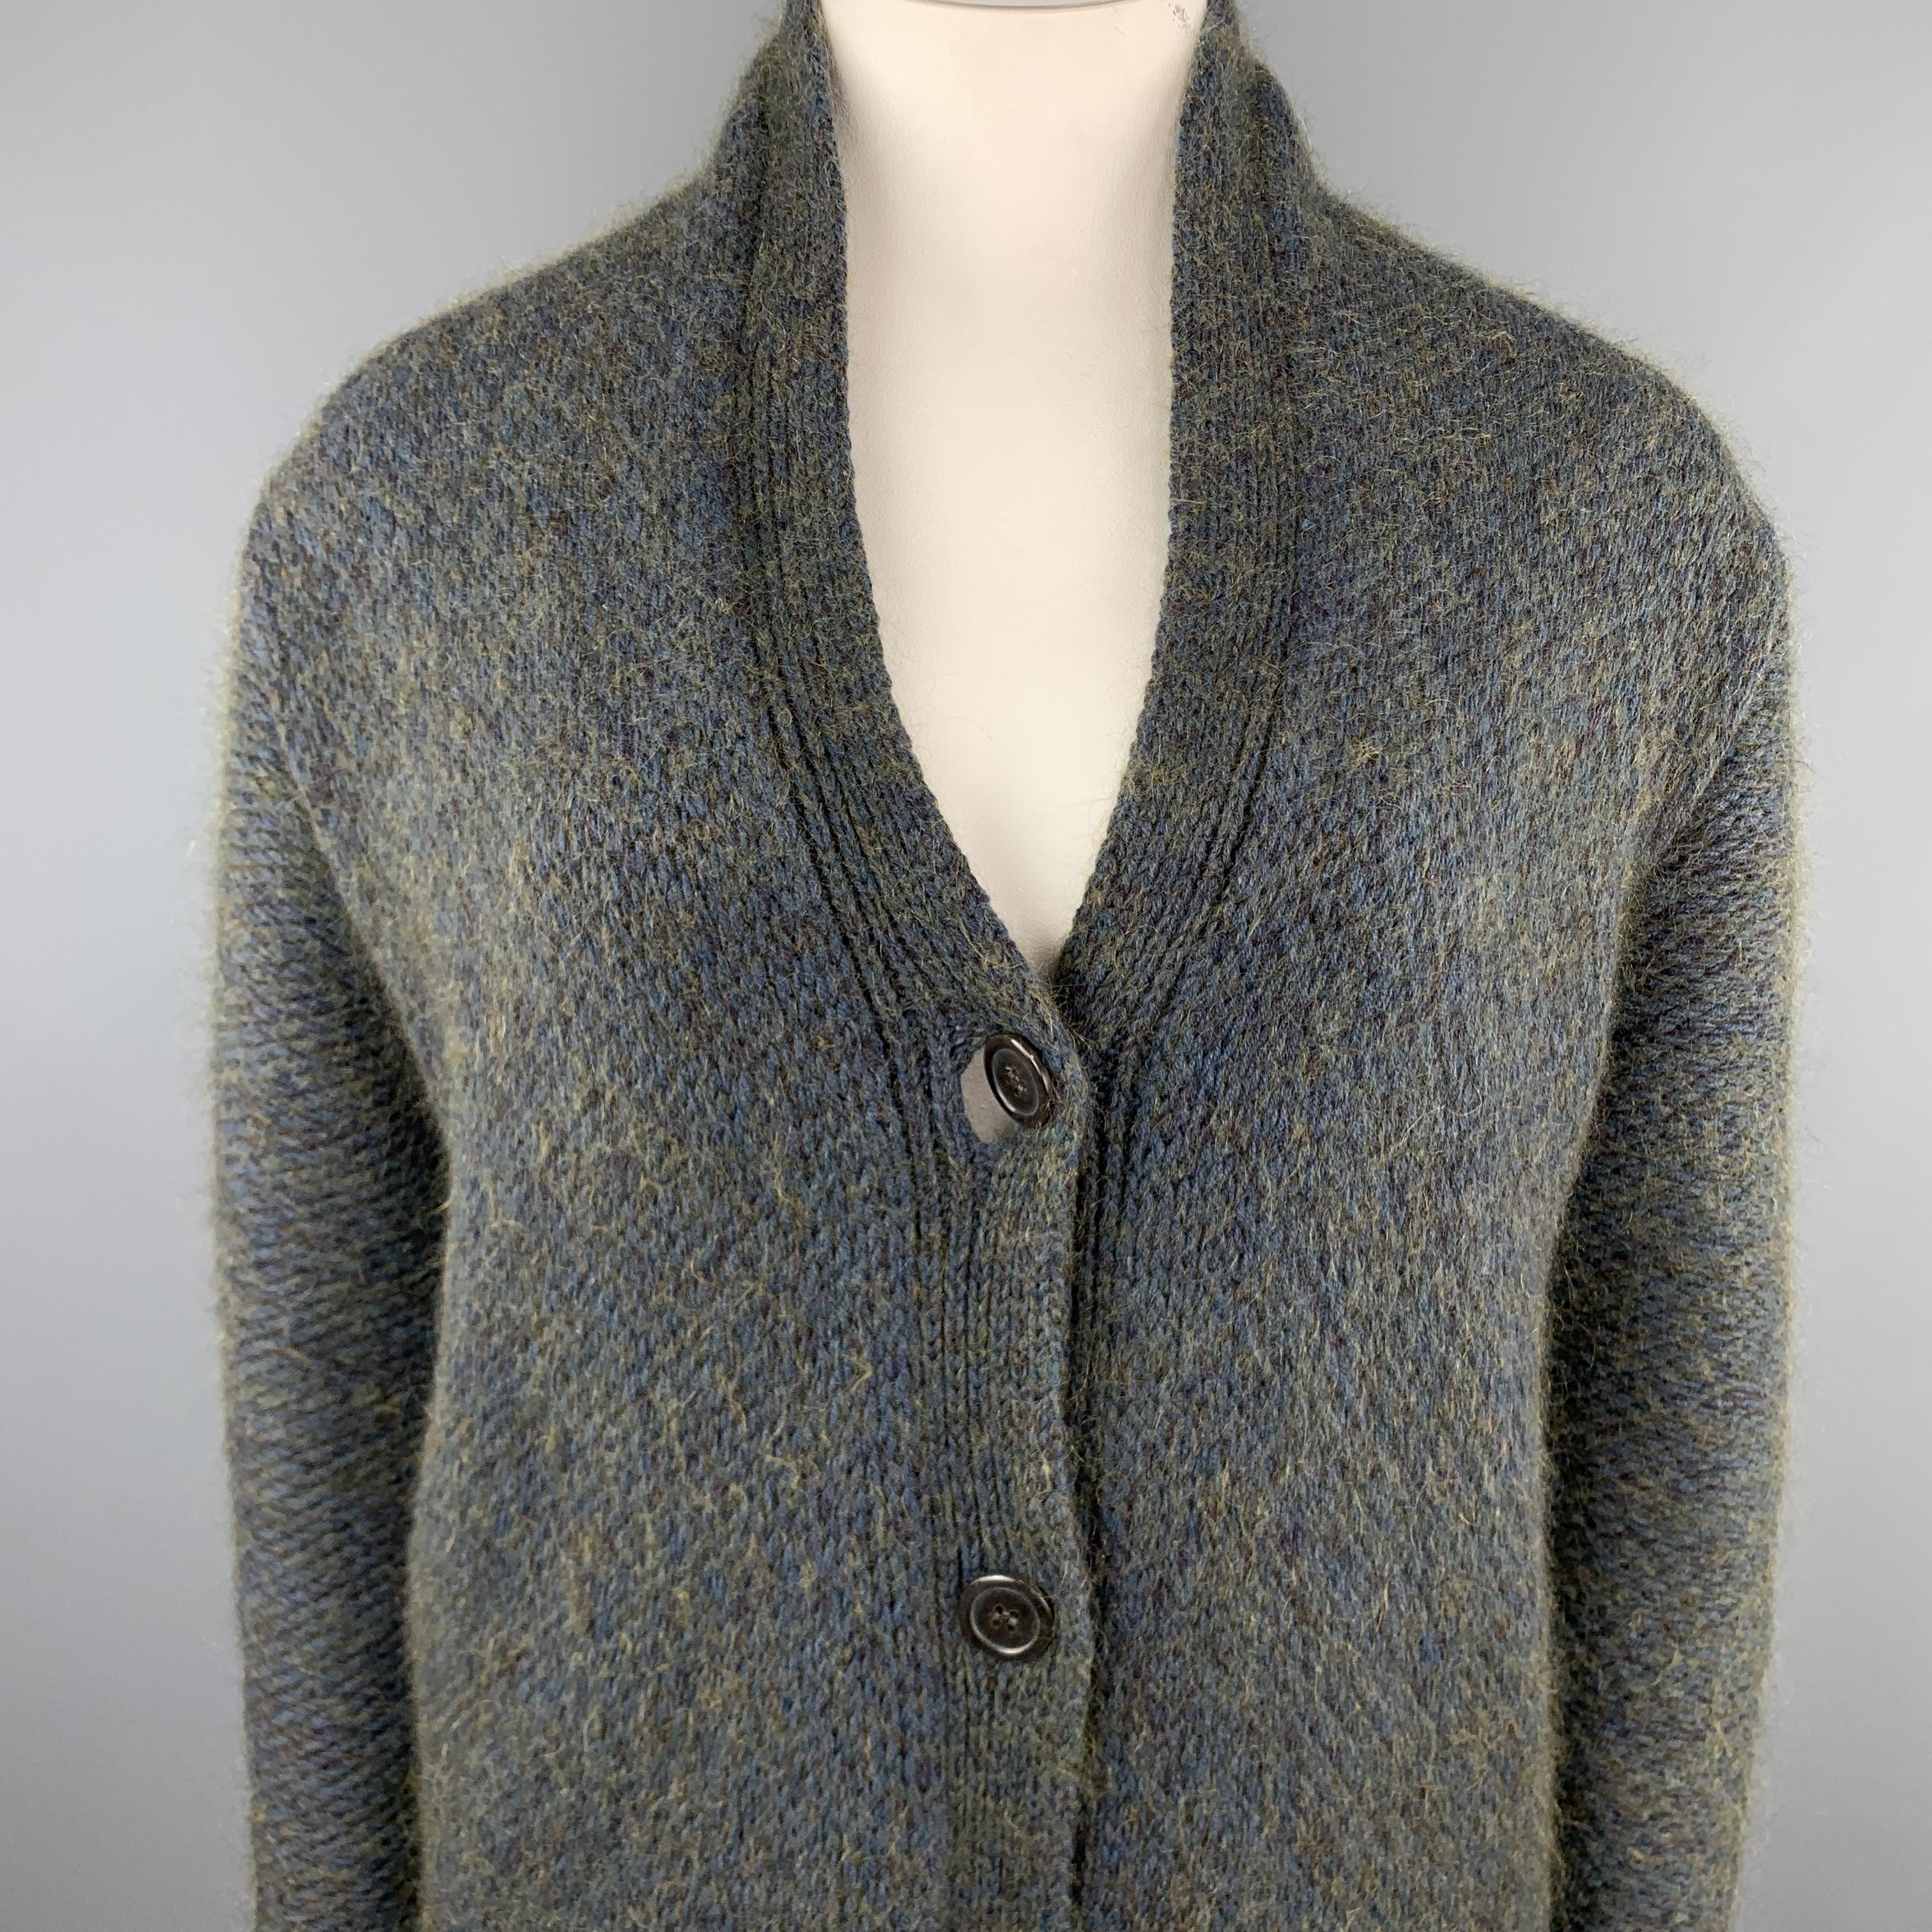 JIL SANDER oversized cardigan comes in a chunky blue and green heathered cashmere blend knit with a V neck, and four button front. Made in Italy.

Excellent  Pre-Owned Condition.
Marked: IT 40

Measurements:

Shoulder: 22 in.
Bust: 46 in.
Sleeve: 26